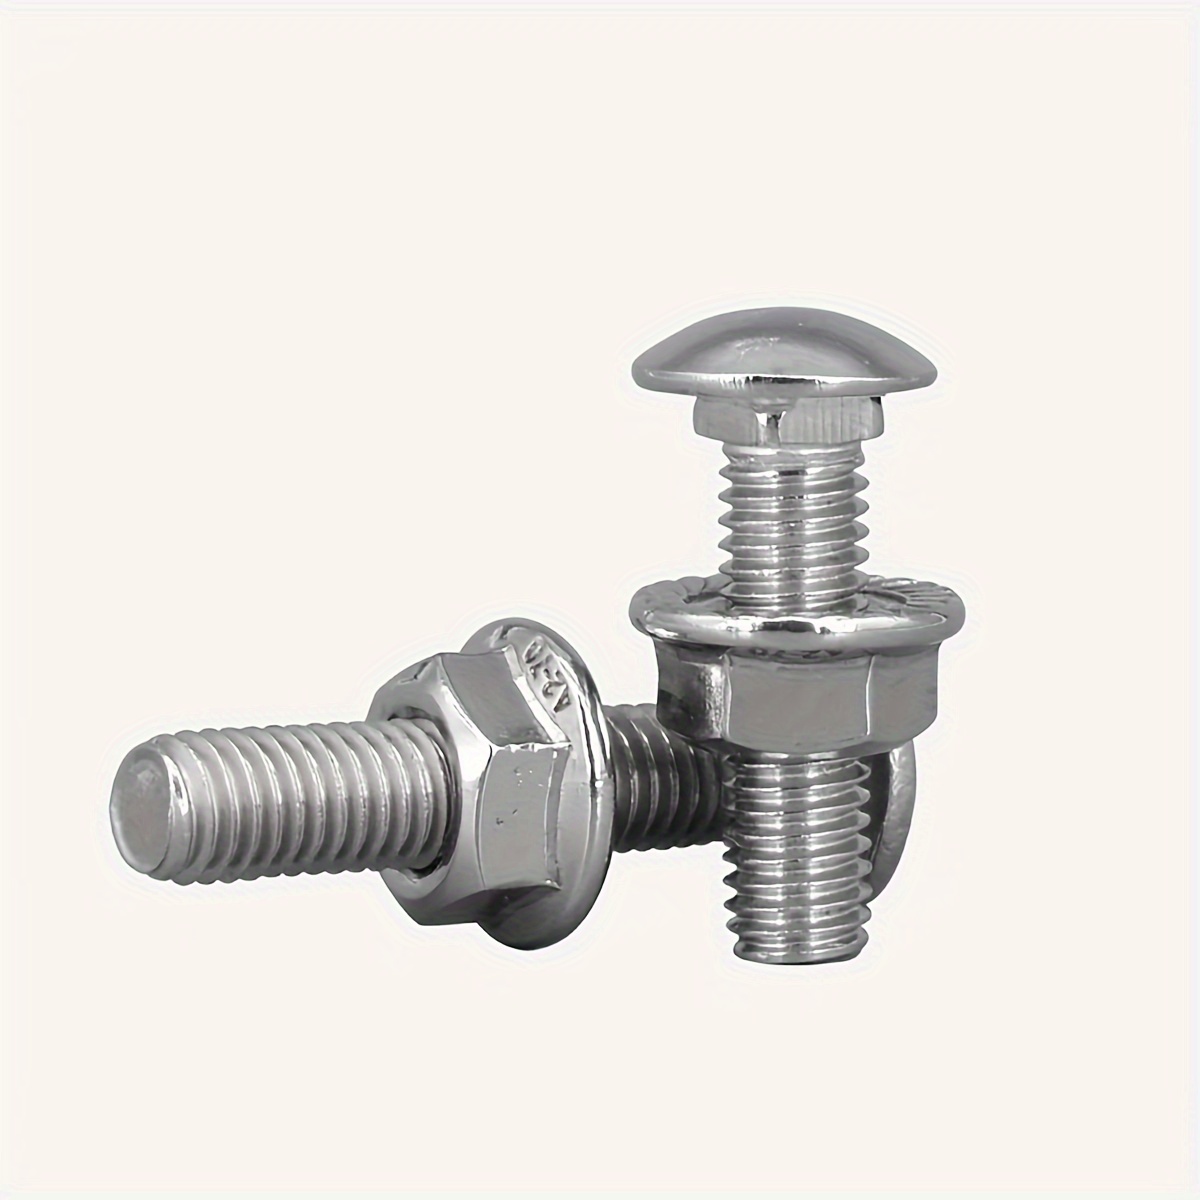 Carriage Bolts M8 x 120/120 mm with Flange Nuts M8 Made of A2 Stainless  Steel (Pack of 100)  DIN 603 & DIN 6923 - Mushroom Screws - Hex Nuts with  Flange MESAROS® : : DIY & Tools